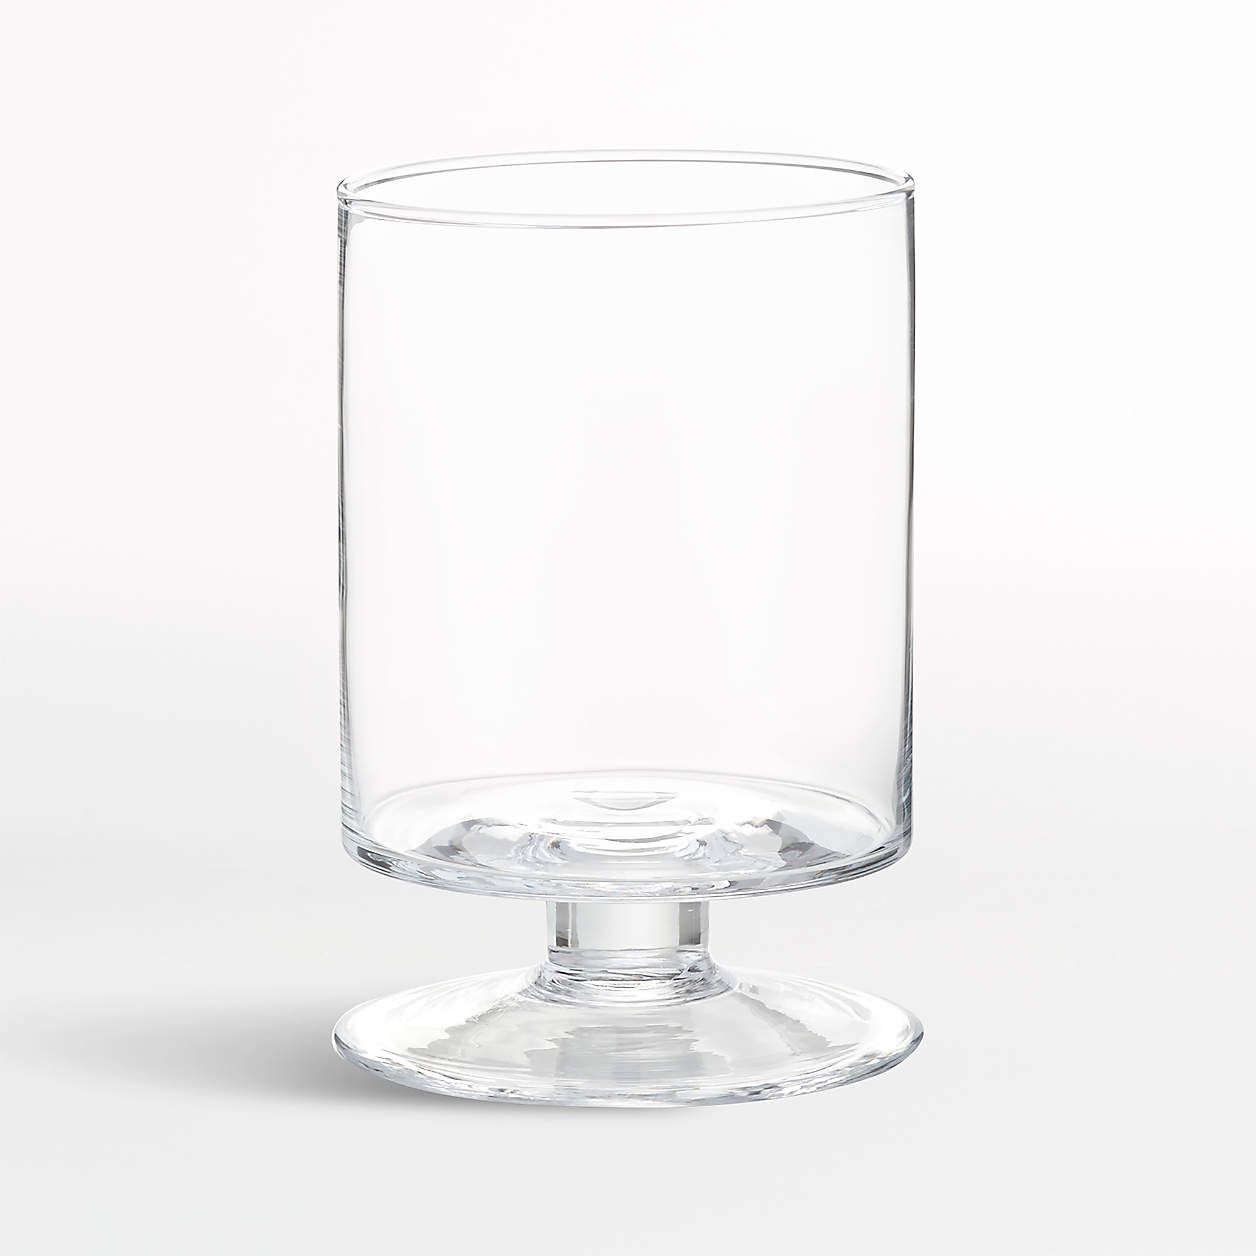 London Narrow Clear Hurricane Candle Holder + Reviews | Crate and Barrel | Crate & Barrel